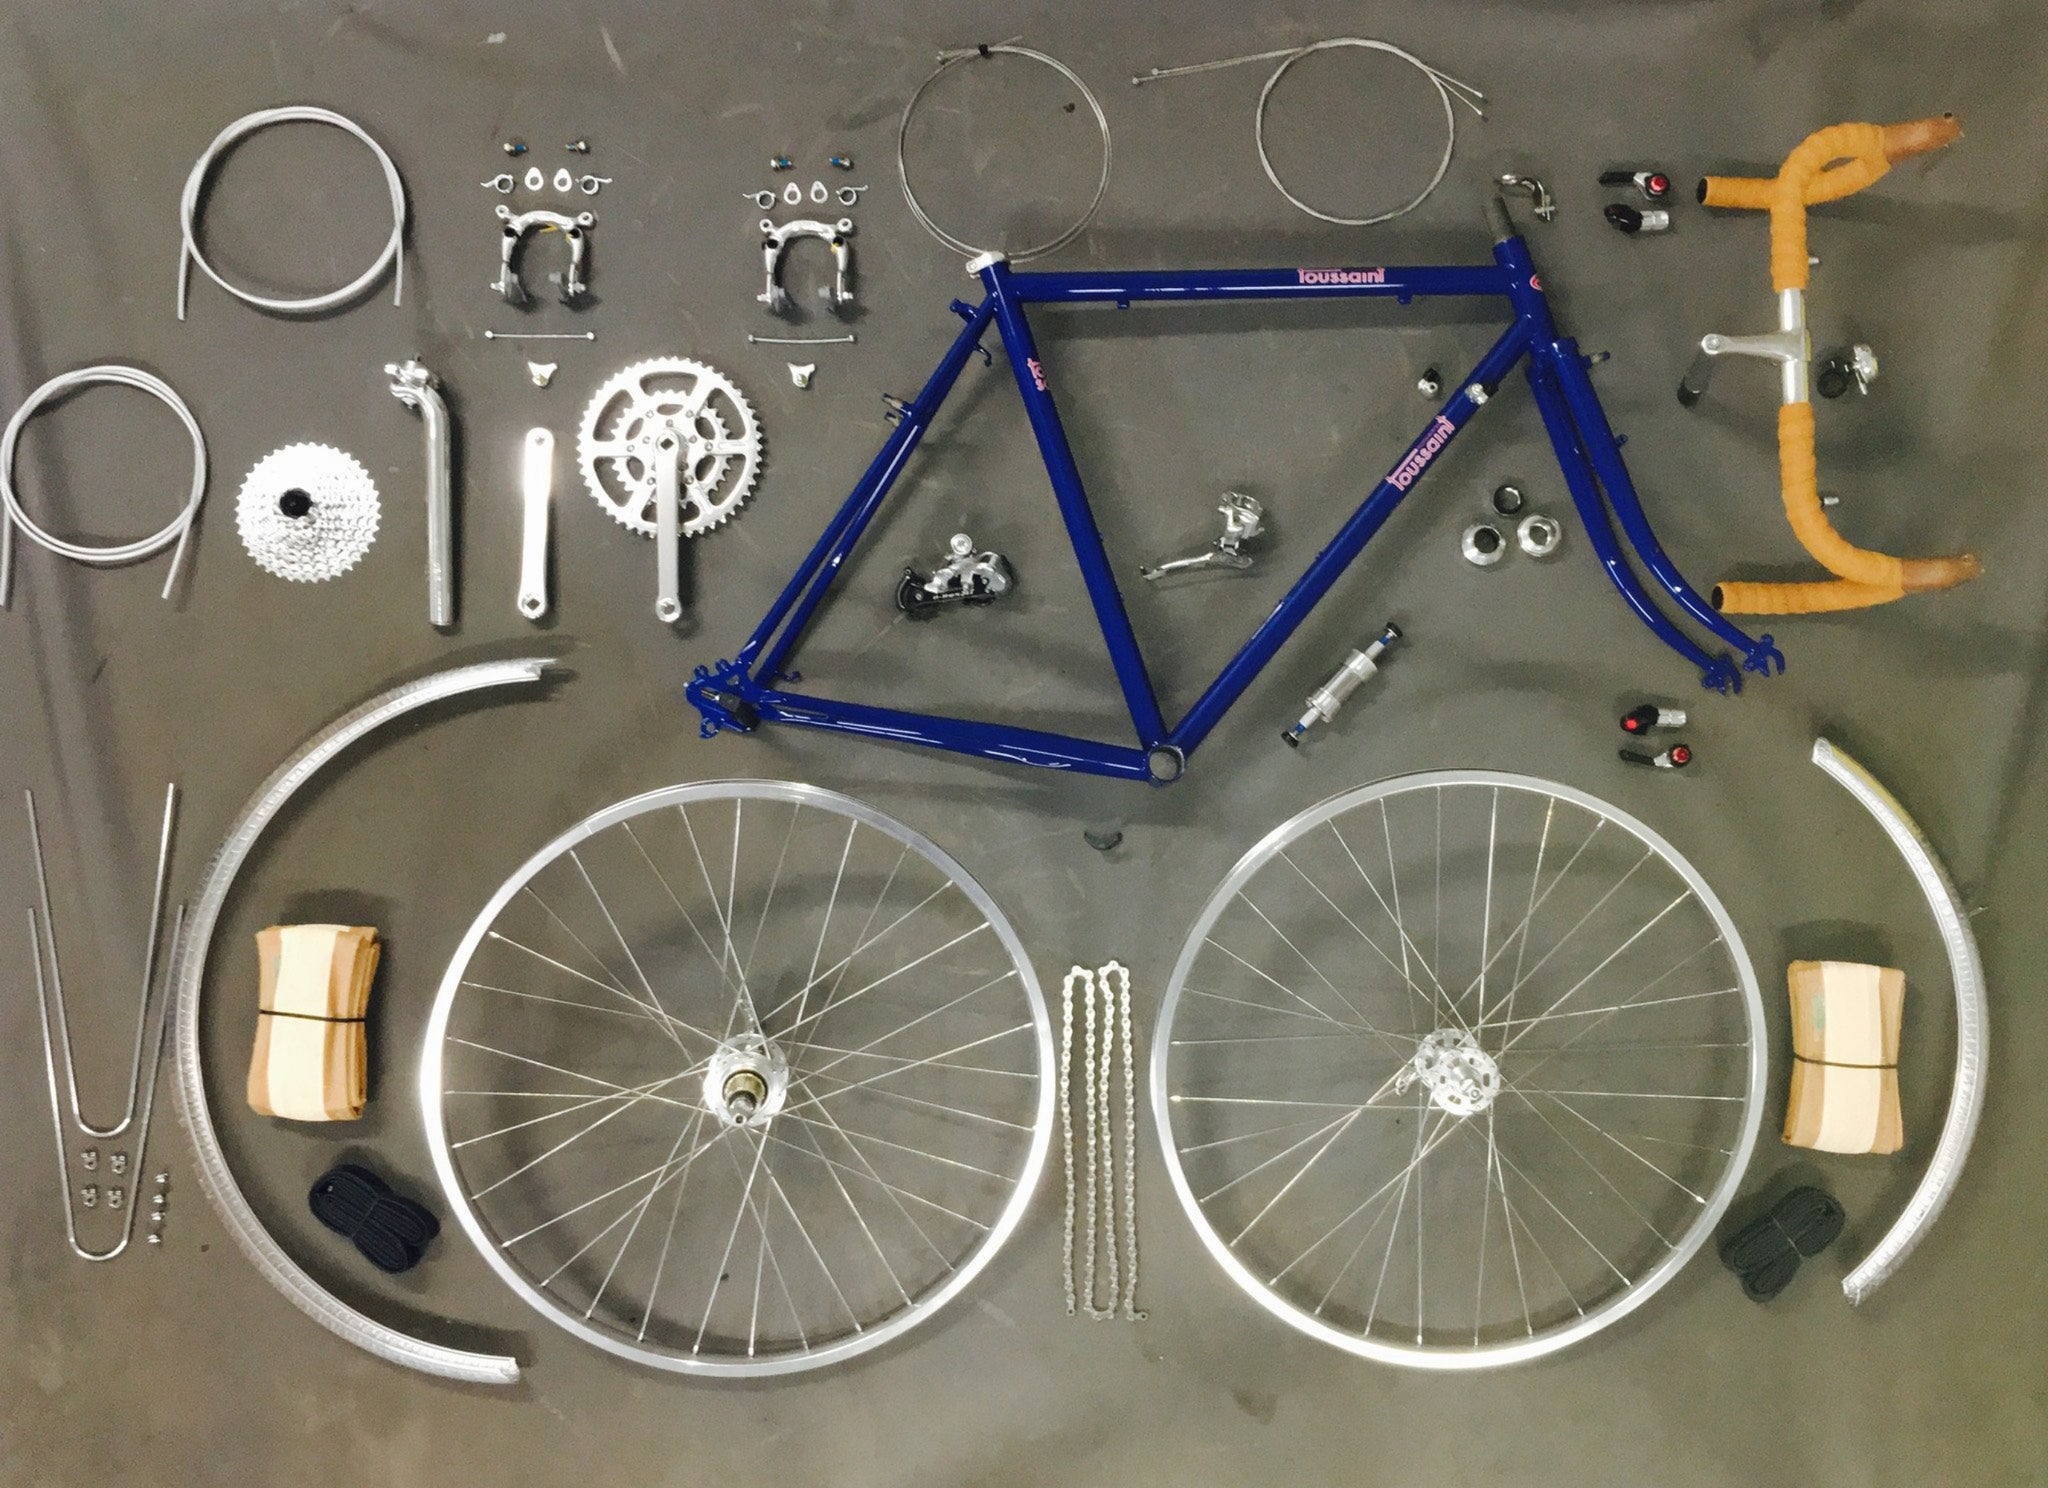 SOLD OUT - DIY Velo Routier 2.0 Frame/Fork and Complete Build Kit